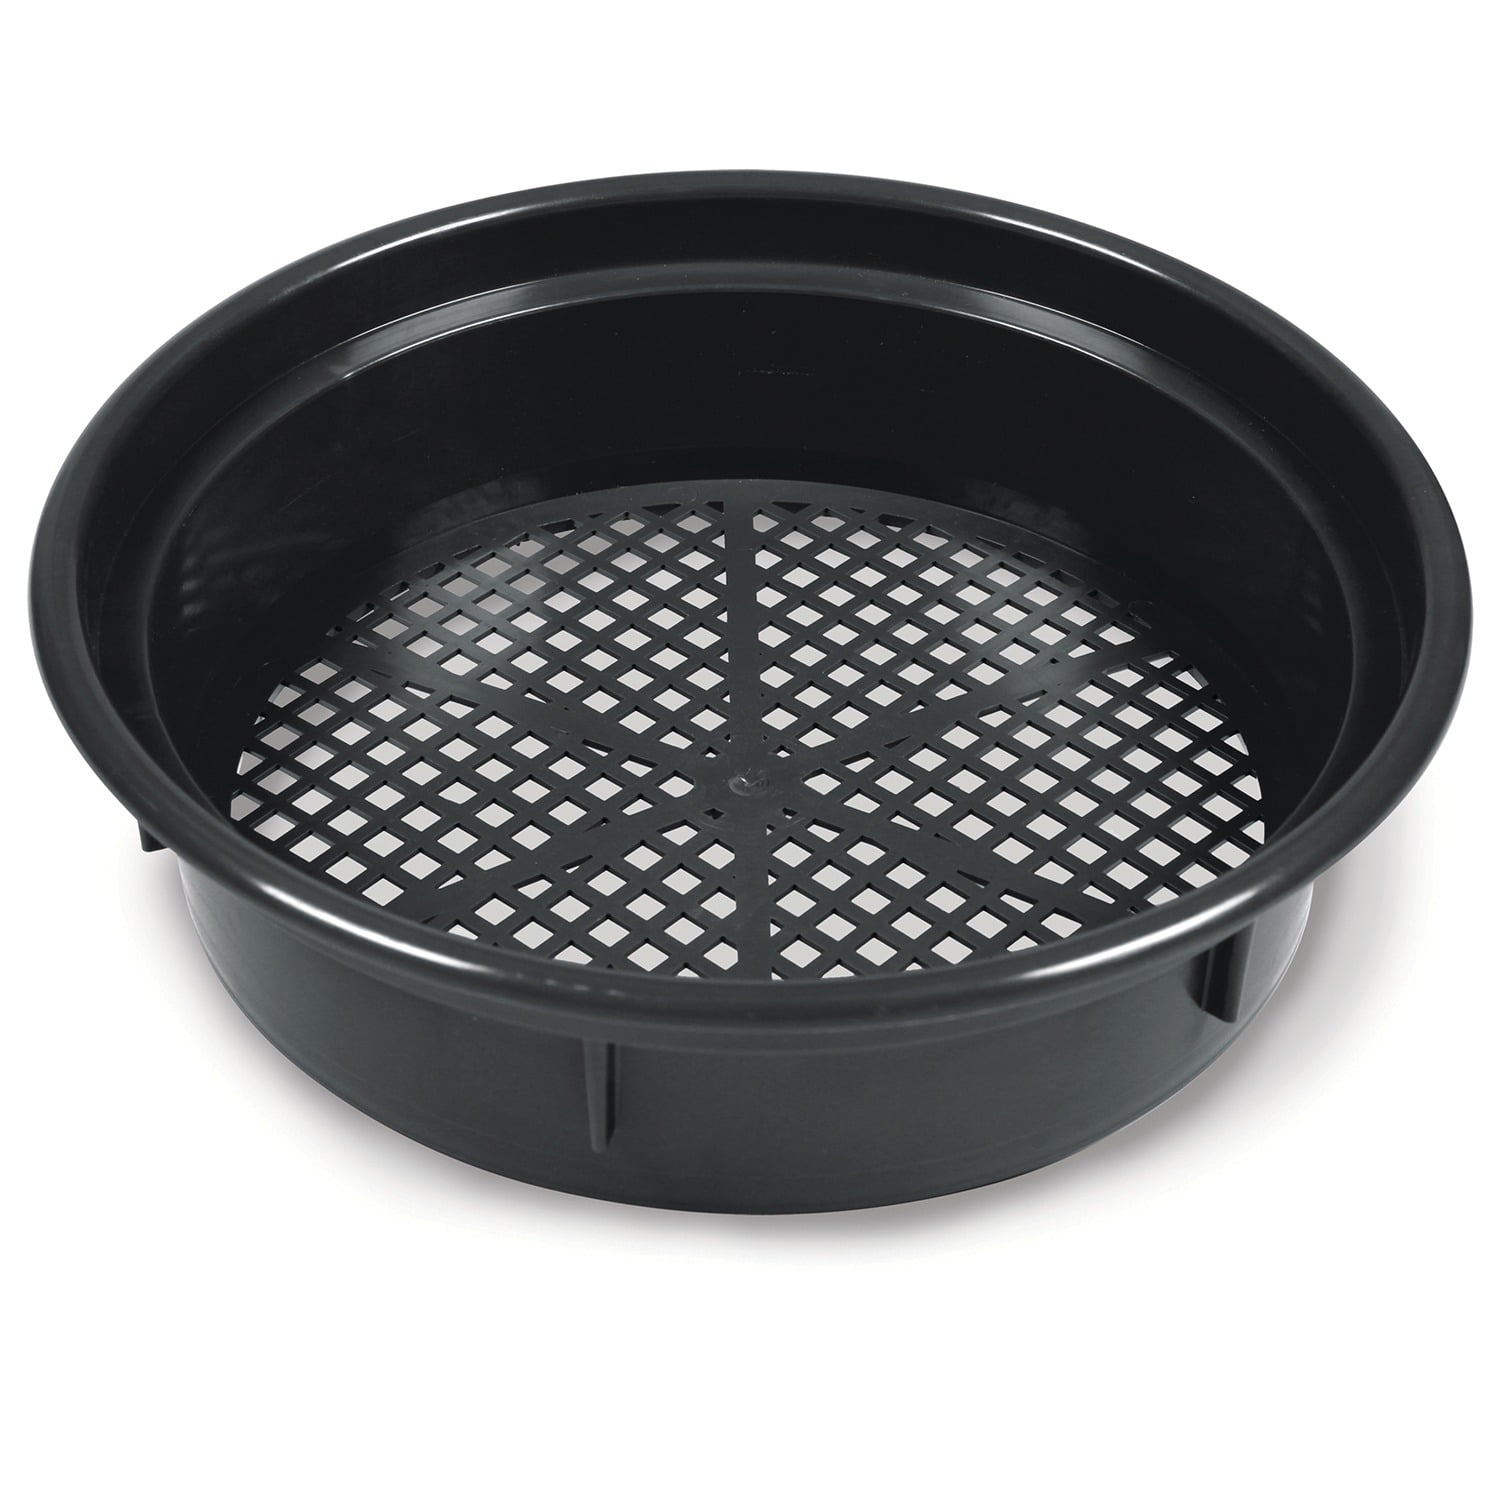 Stansport Gold Panning Classifier - Sifting Pan